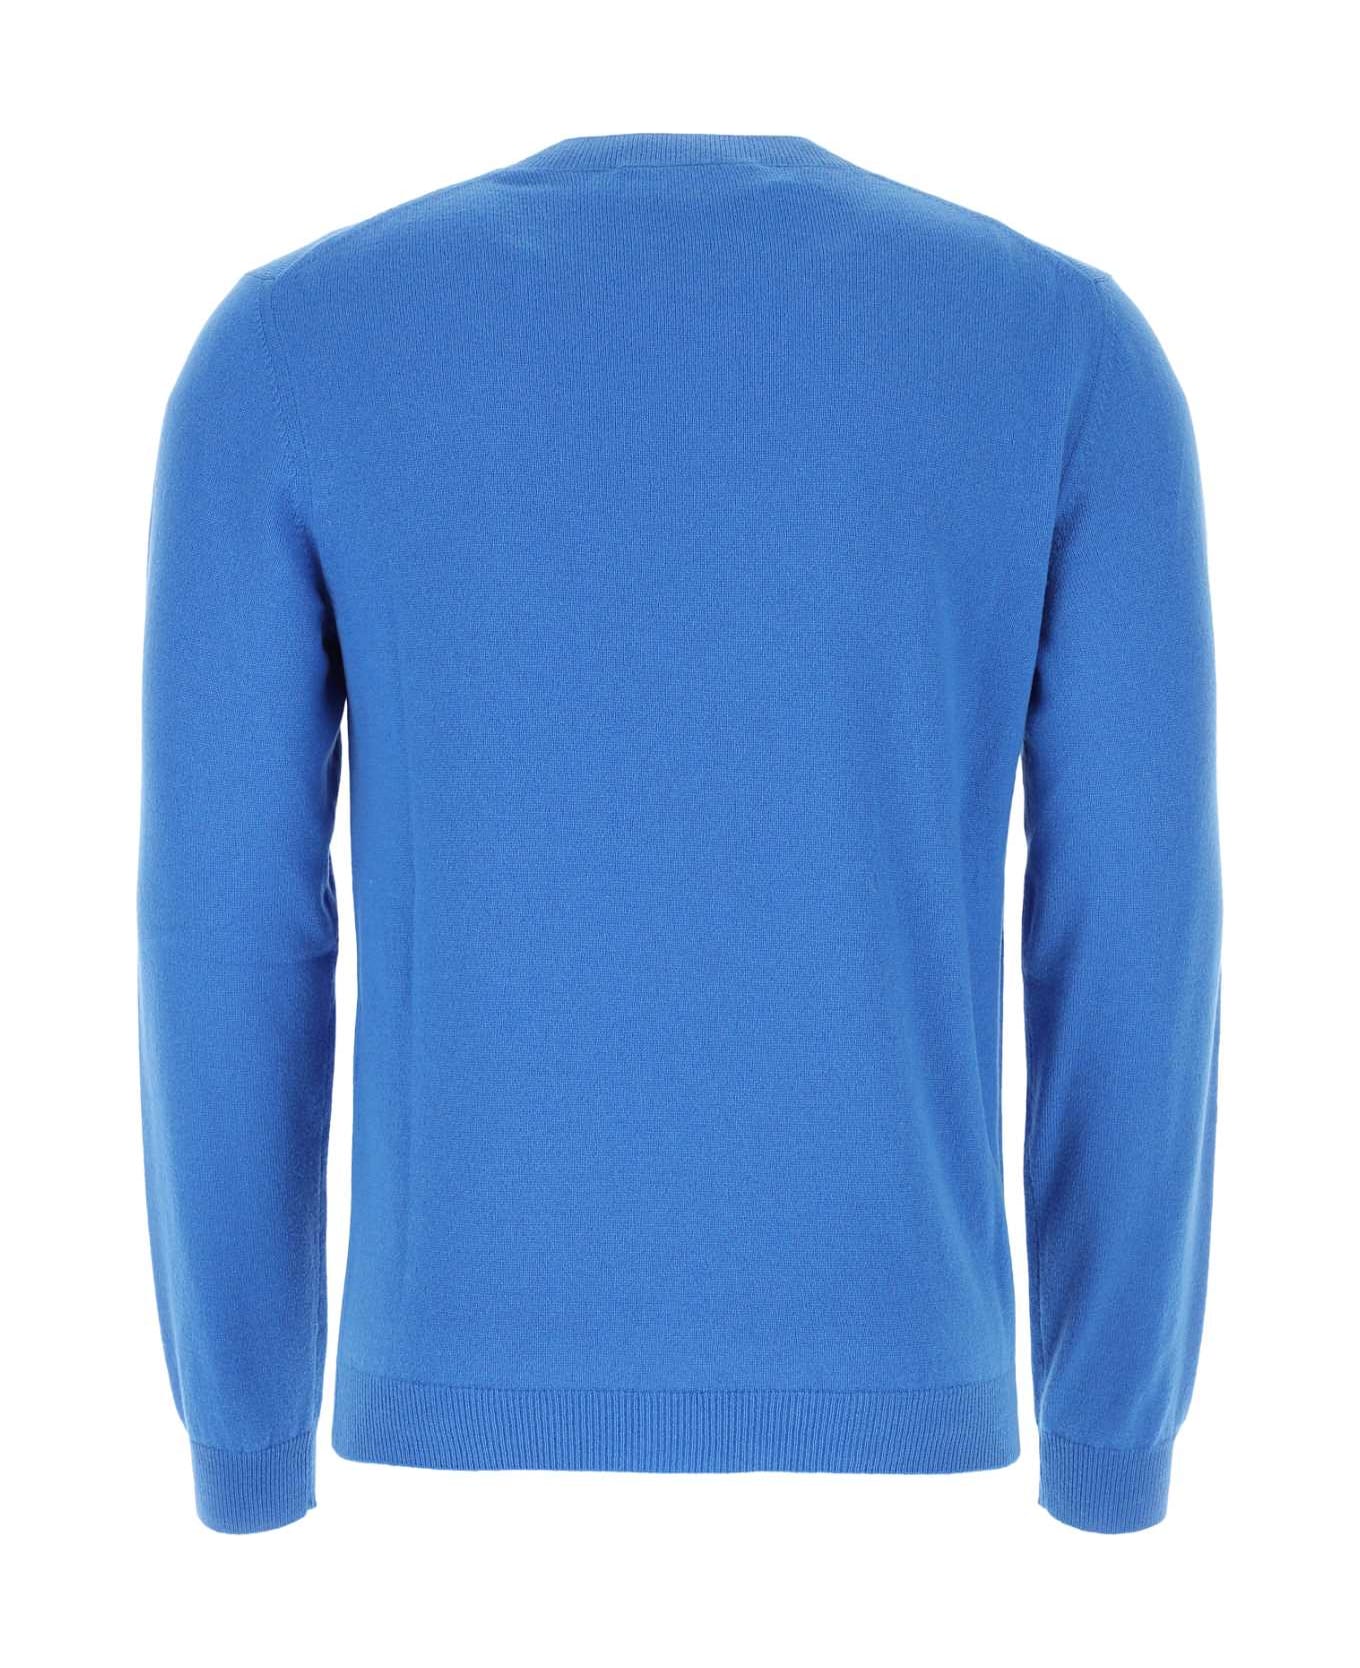 Gucci Turquoise Cashmere Sweater - Blue